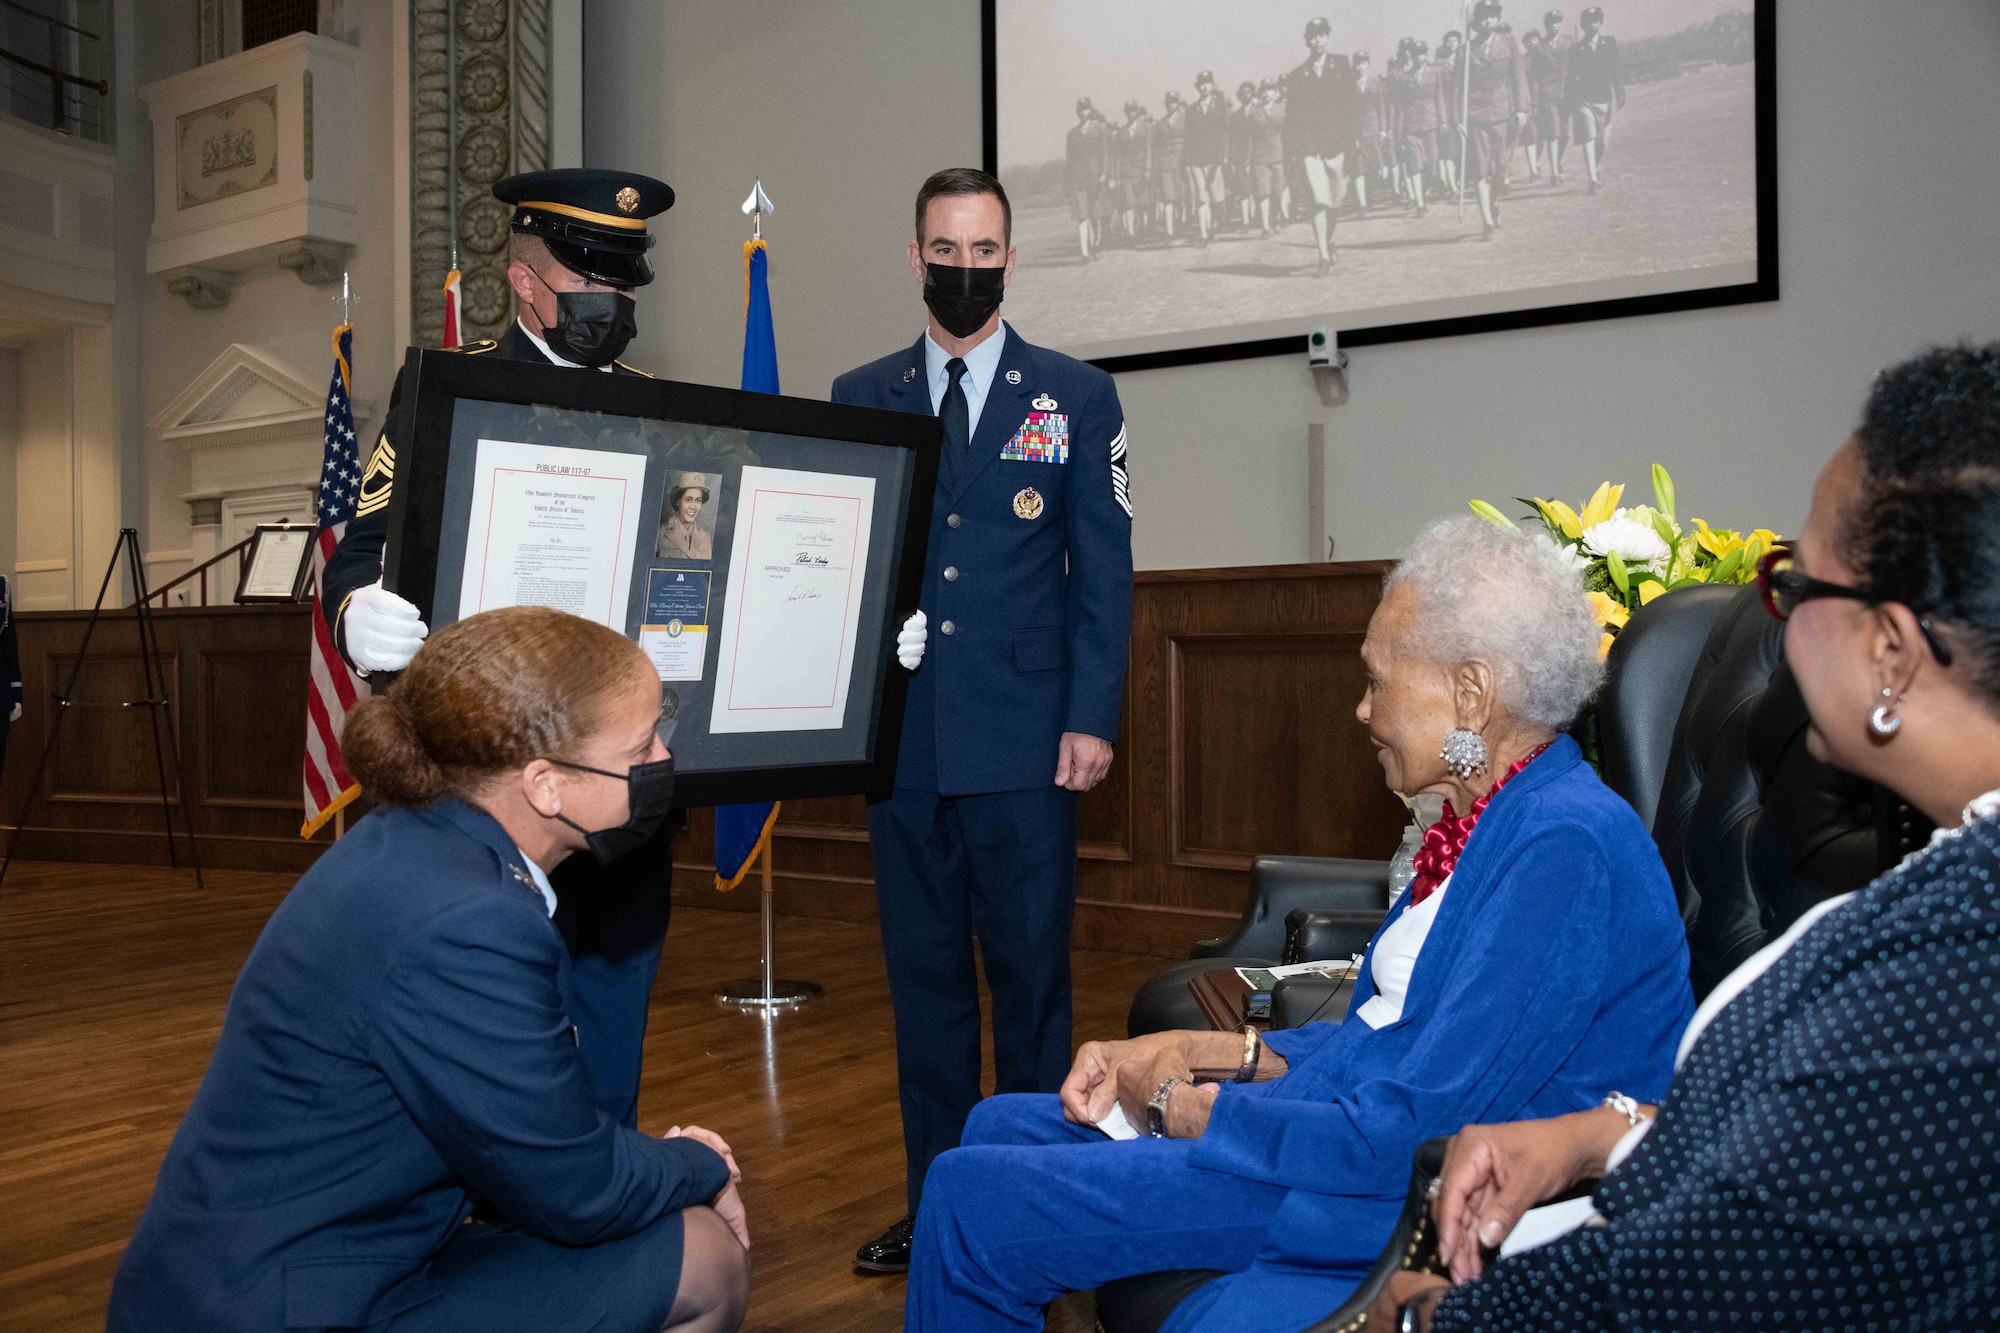 Col. Eries Mentzer, Commander, 42d Air Base Wing, Chief Master Sgt. Lee Hoover, Command Chief Master Sergeant, 42d ABW, and an Alabama National Guard Honor Guardsman present the framed citation of the Congressional Medal of Honor to Private Romay Catherine Johnson Davis at Montgomery City Hall, Jul. 26, 2022.